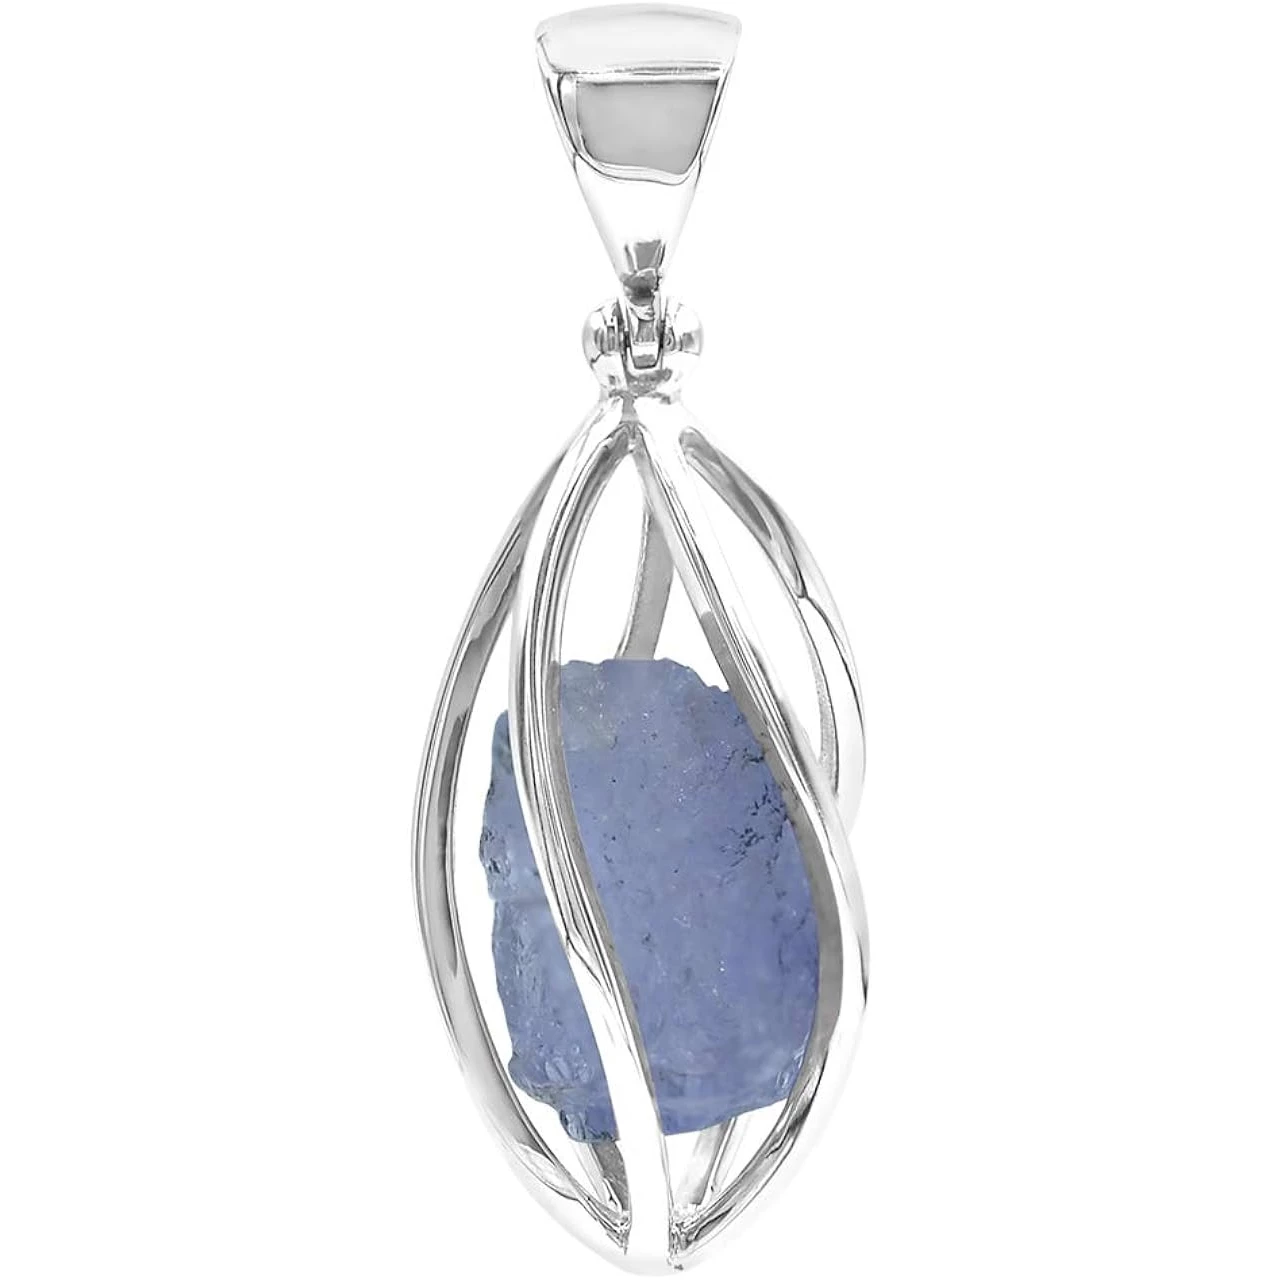 Rough Gemstone Sterling Silver Cage Pendant